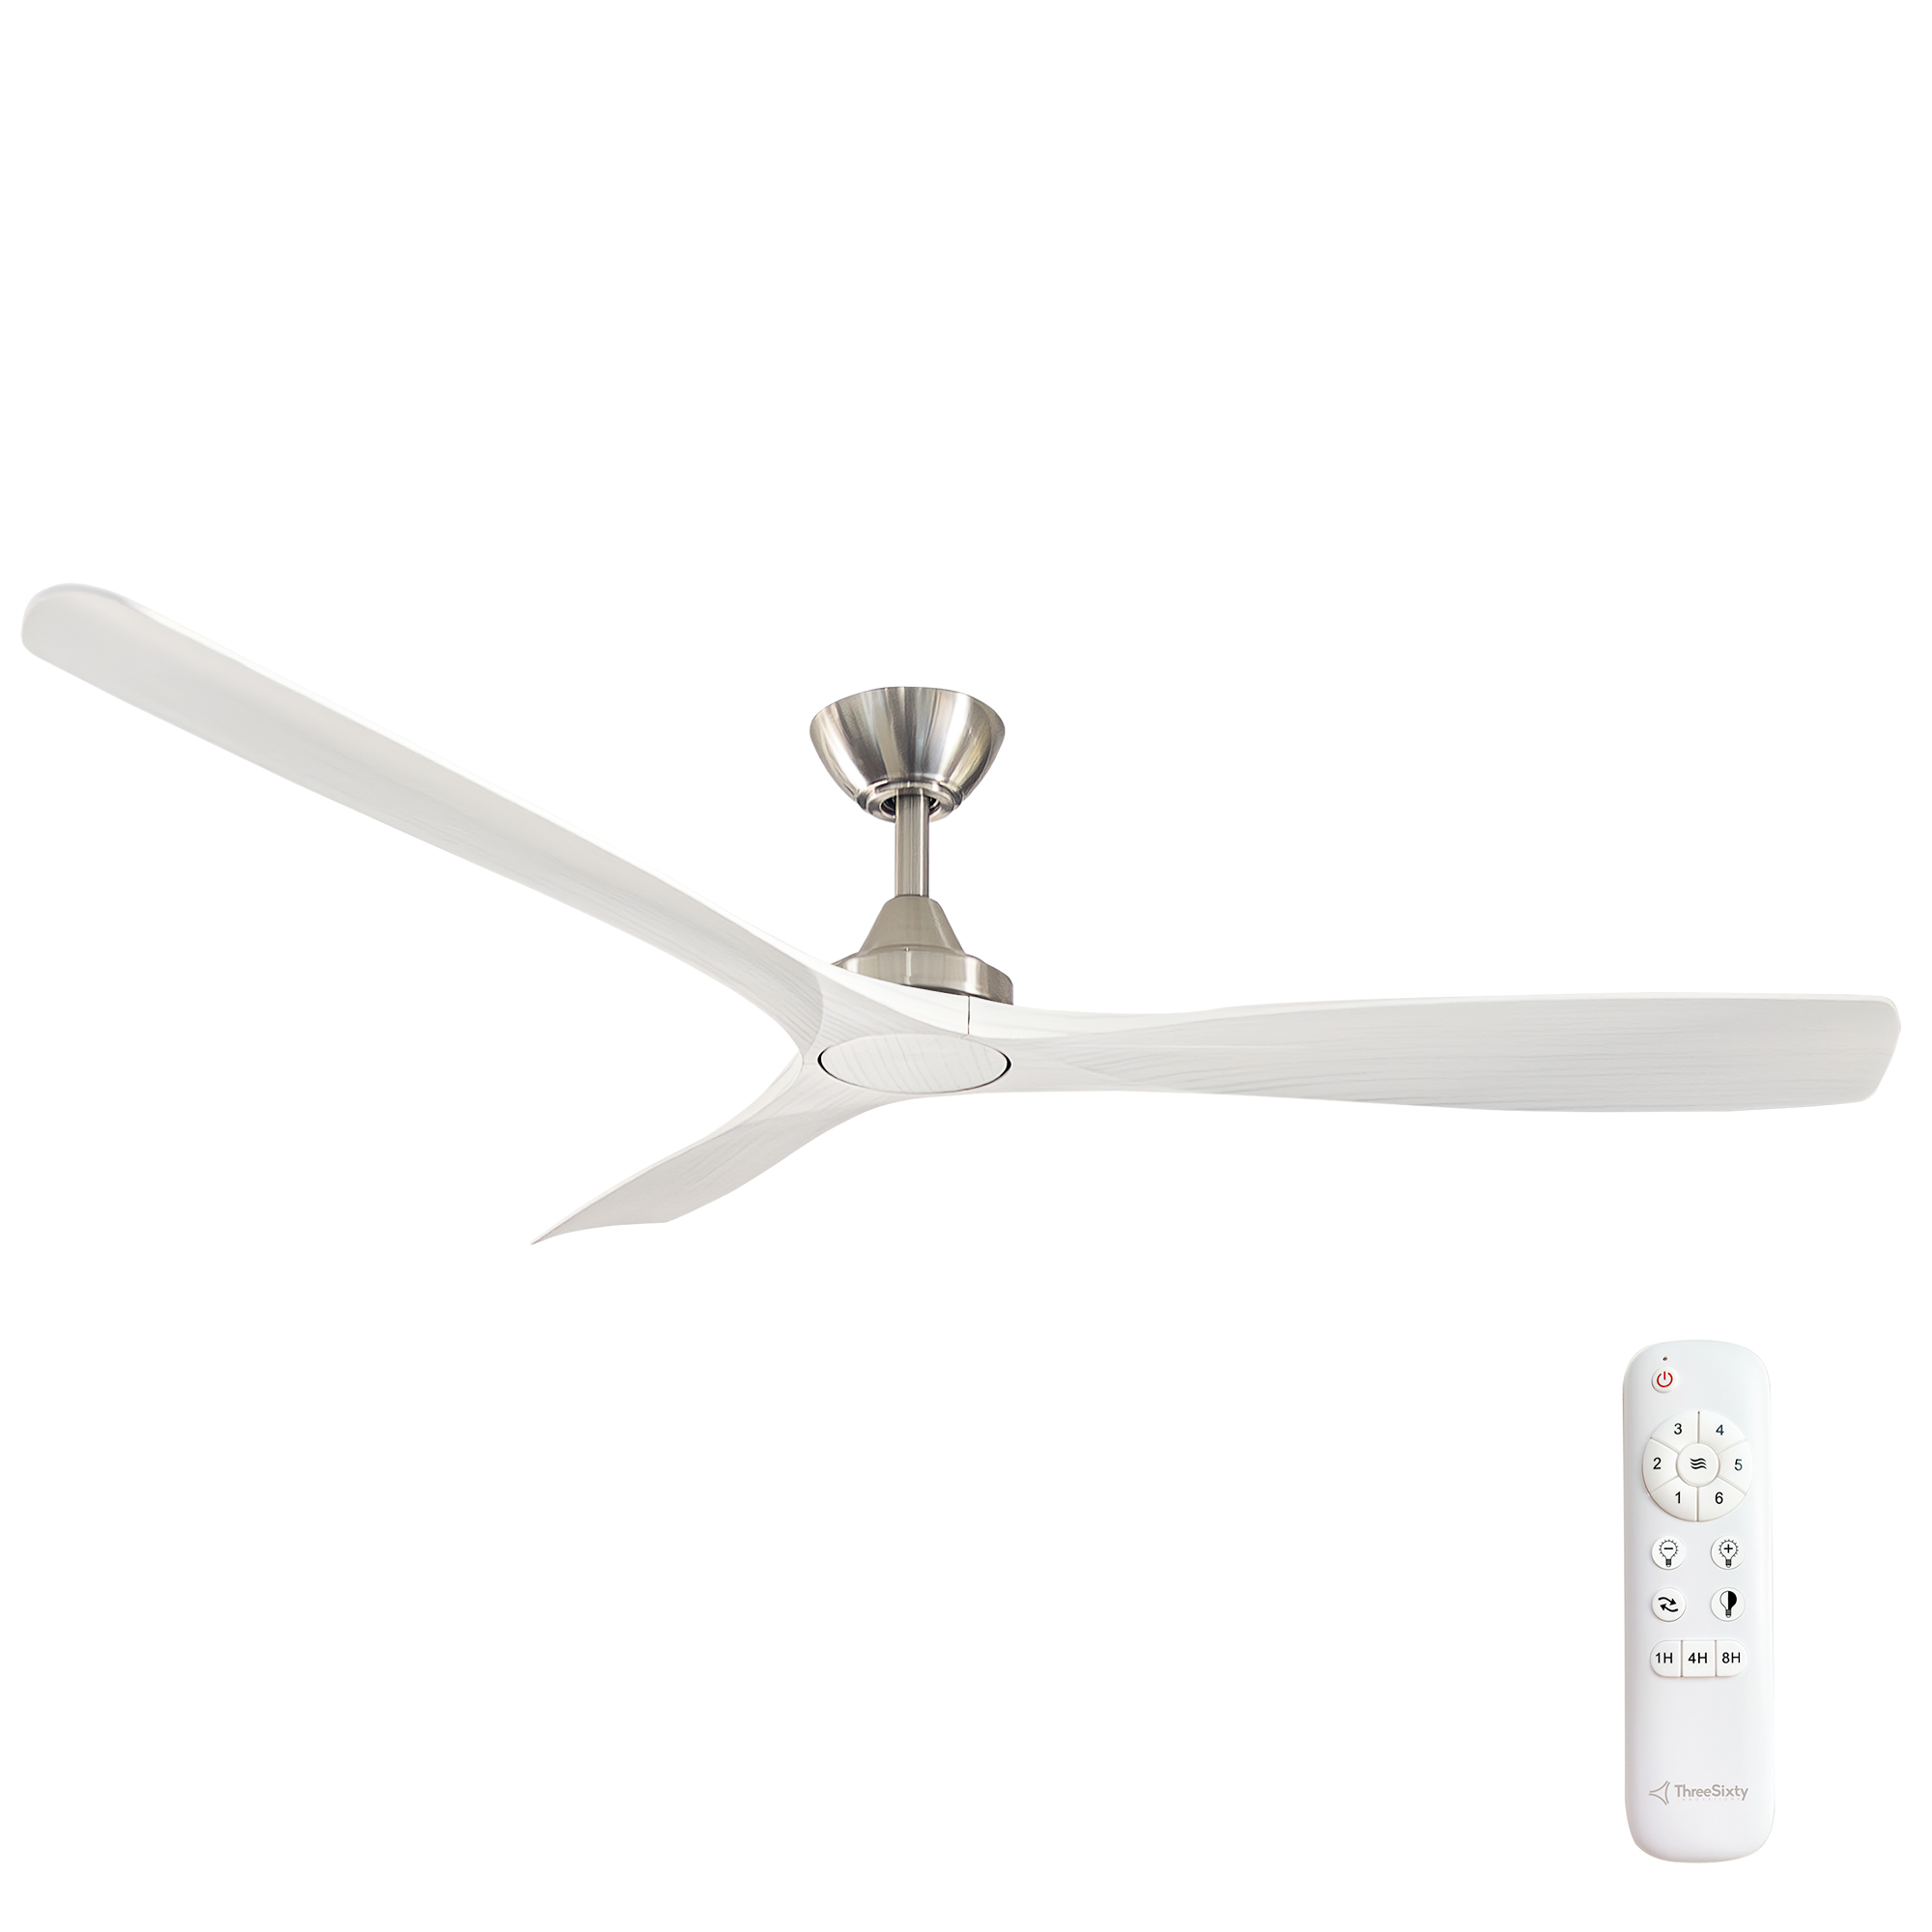 60" Spitfire DC Ceiling Fan in Brushed Nickel with White Wash blades